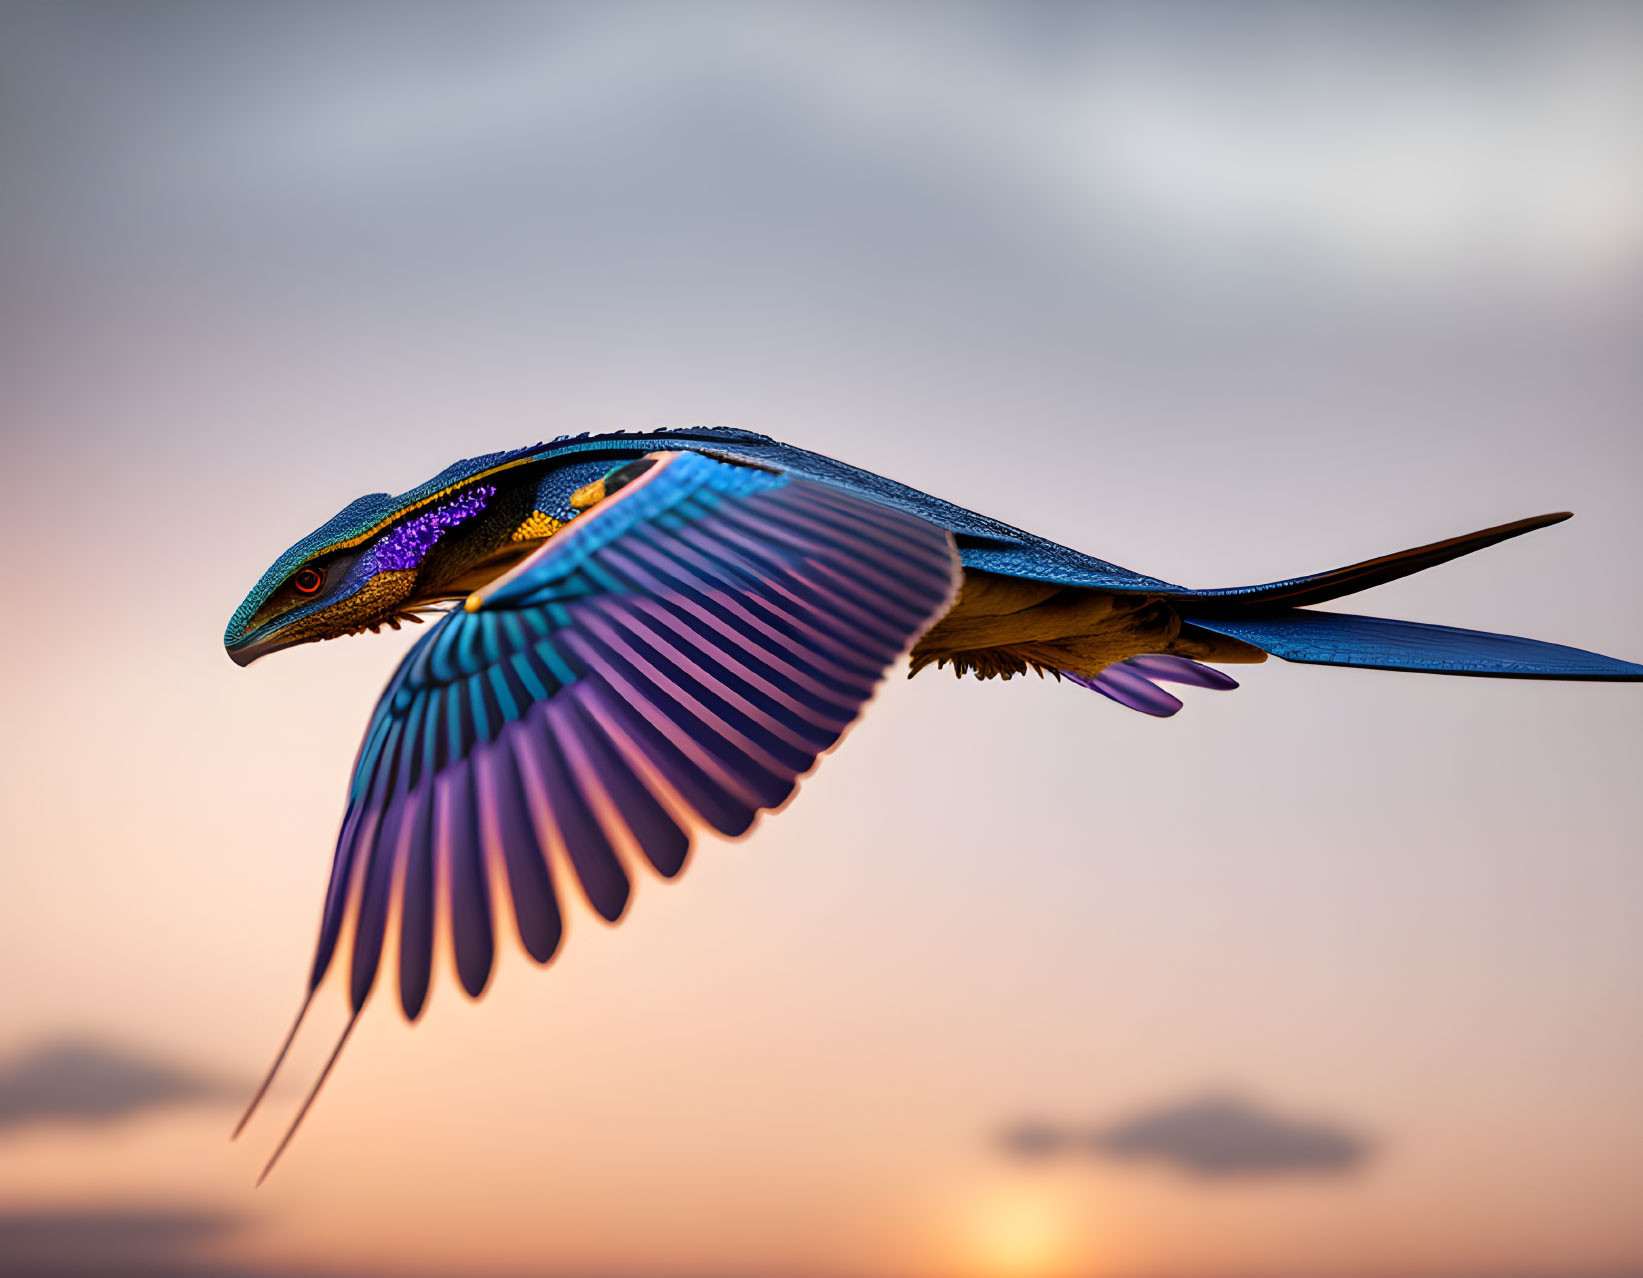 Colorful Bird Flying in Sunset Sky with Blue and Purple Feathers